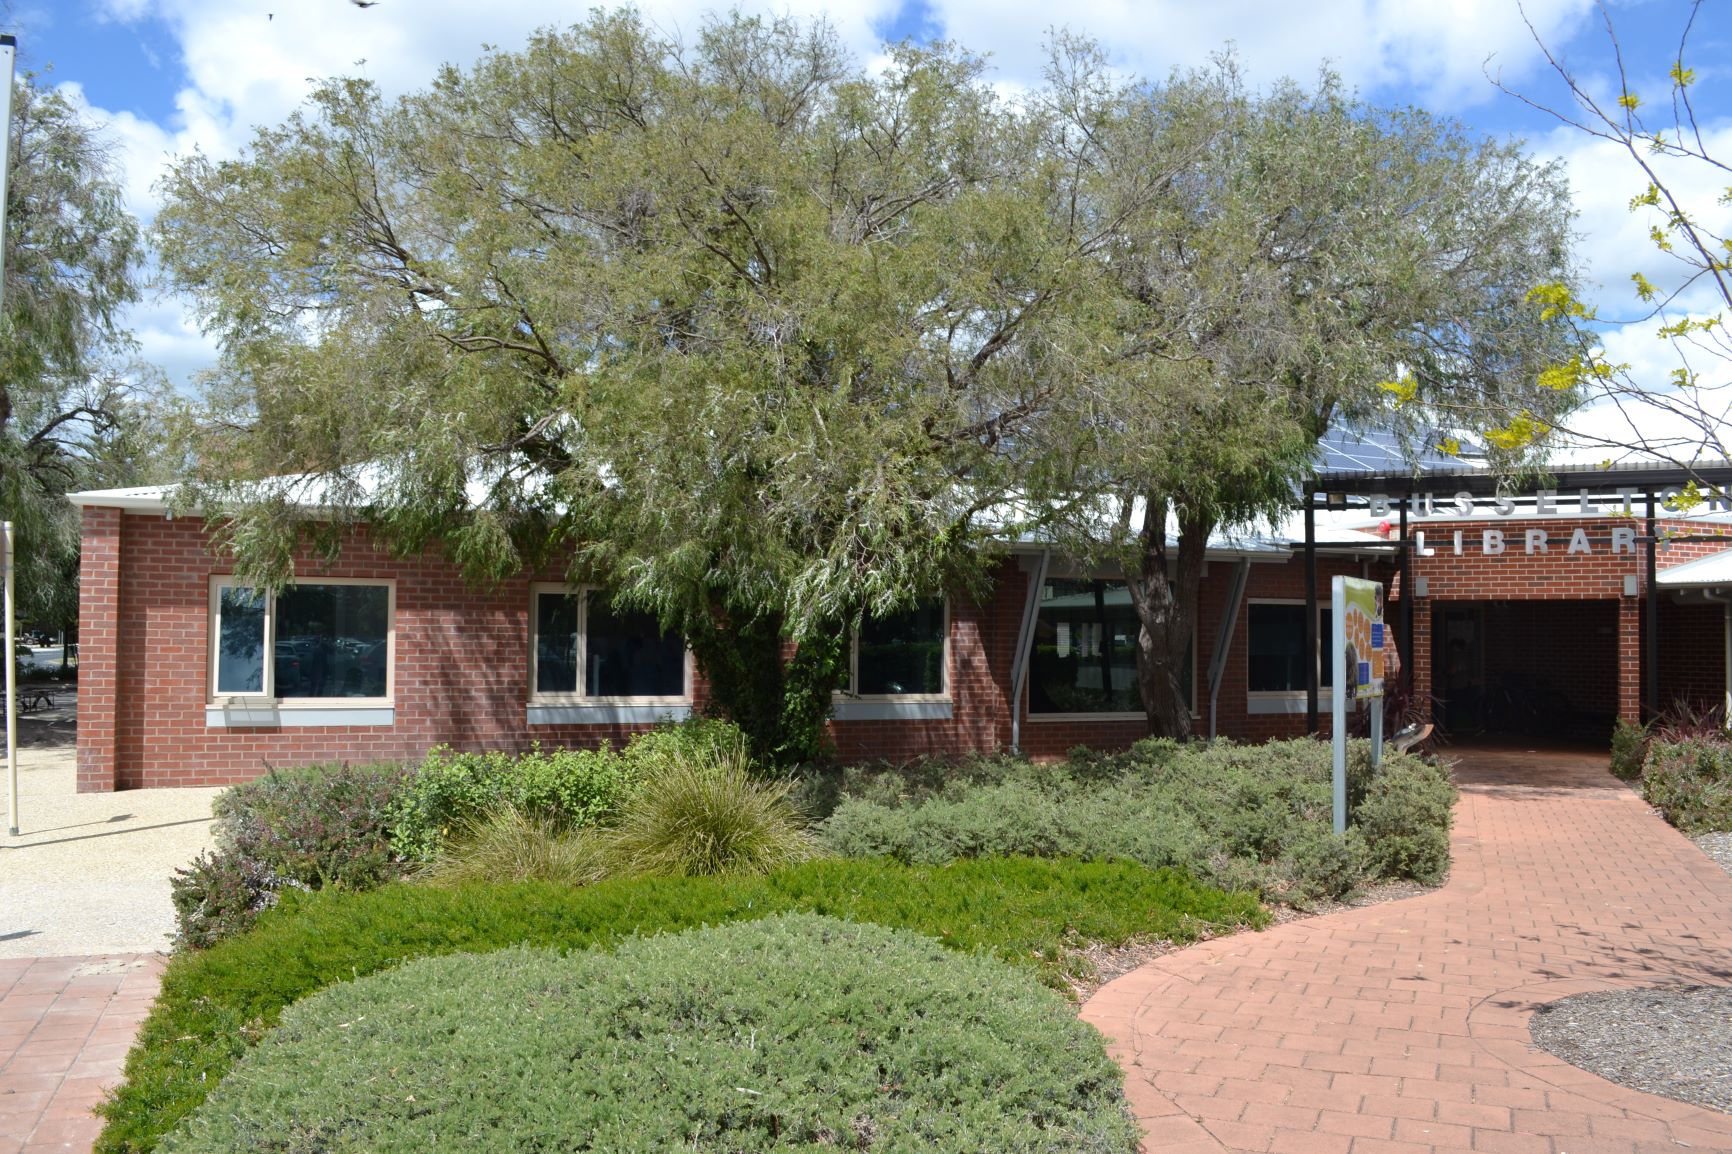 Busselton Library